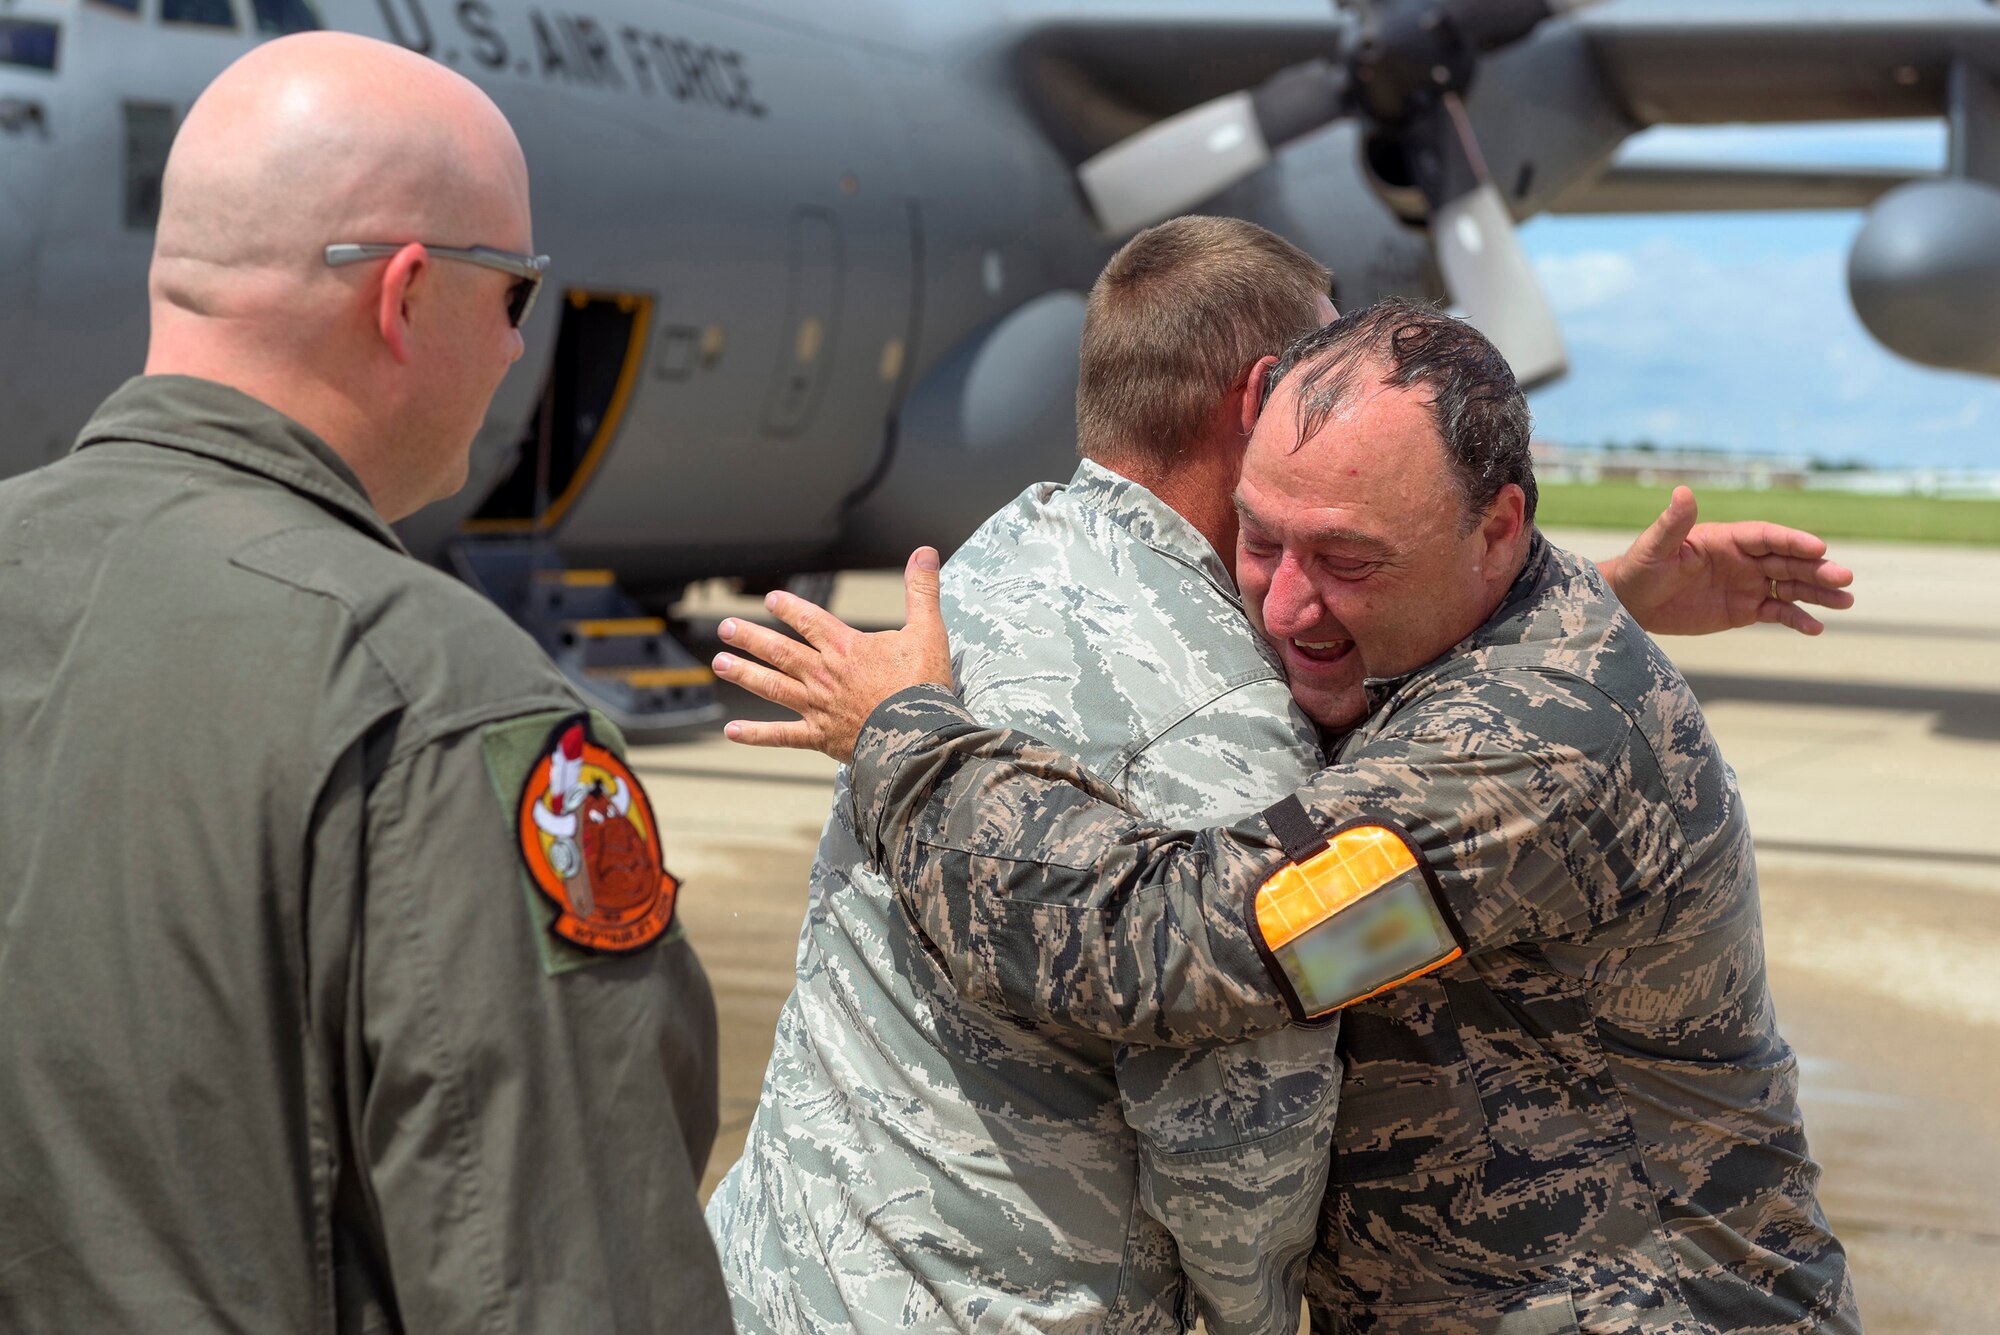 U.S. Air Force Col. Barton Welker, the commander of the 182nd Maintenance Group, Illinois Air National Guard, embraces a colleague after his “fini flight” at the 182nd Airlift Wing in Peoria, Ill., July 25, 2016. Welker is scheduled to retire Aug. 1 after 34 years of military service. (U.S. Air National Guard photo by Staff Sgt. Lealan Buehrer) (Identification badge was digitally obscured for OPSEC.)